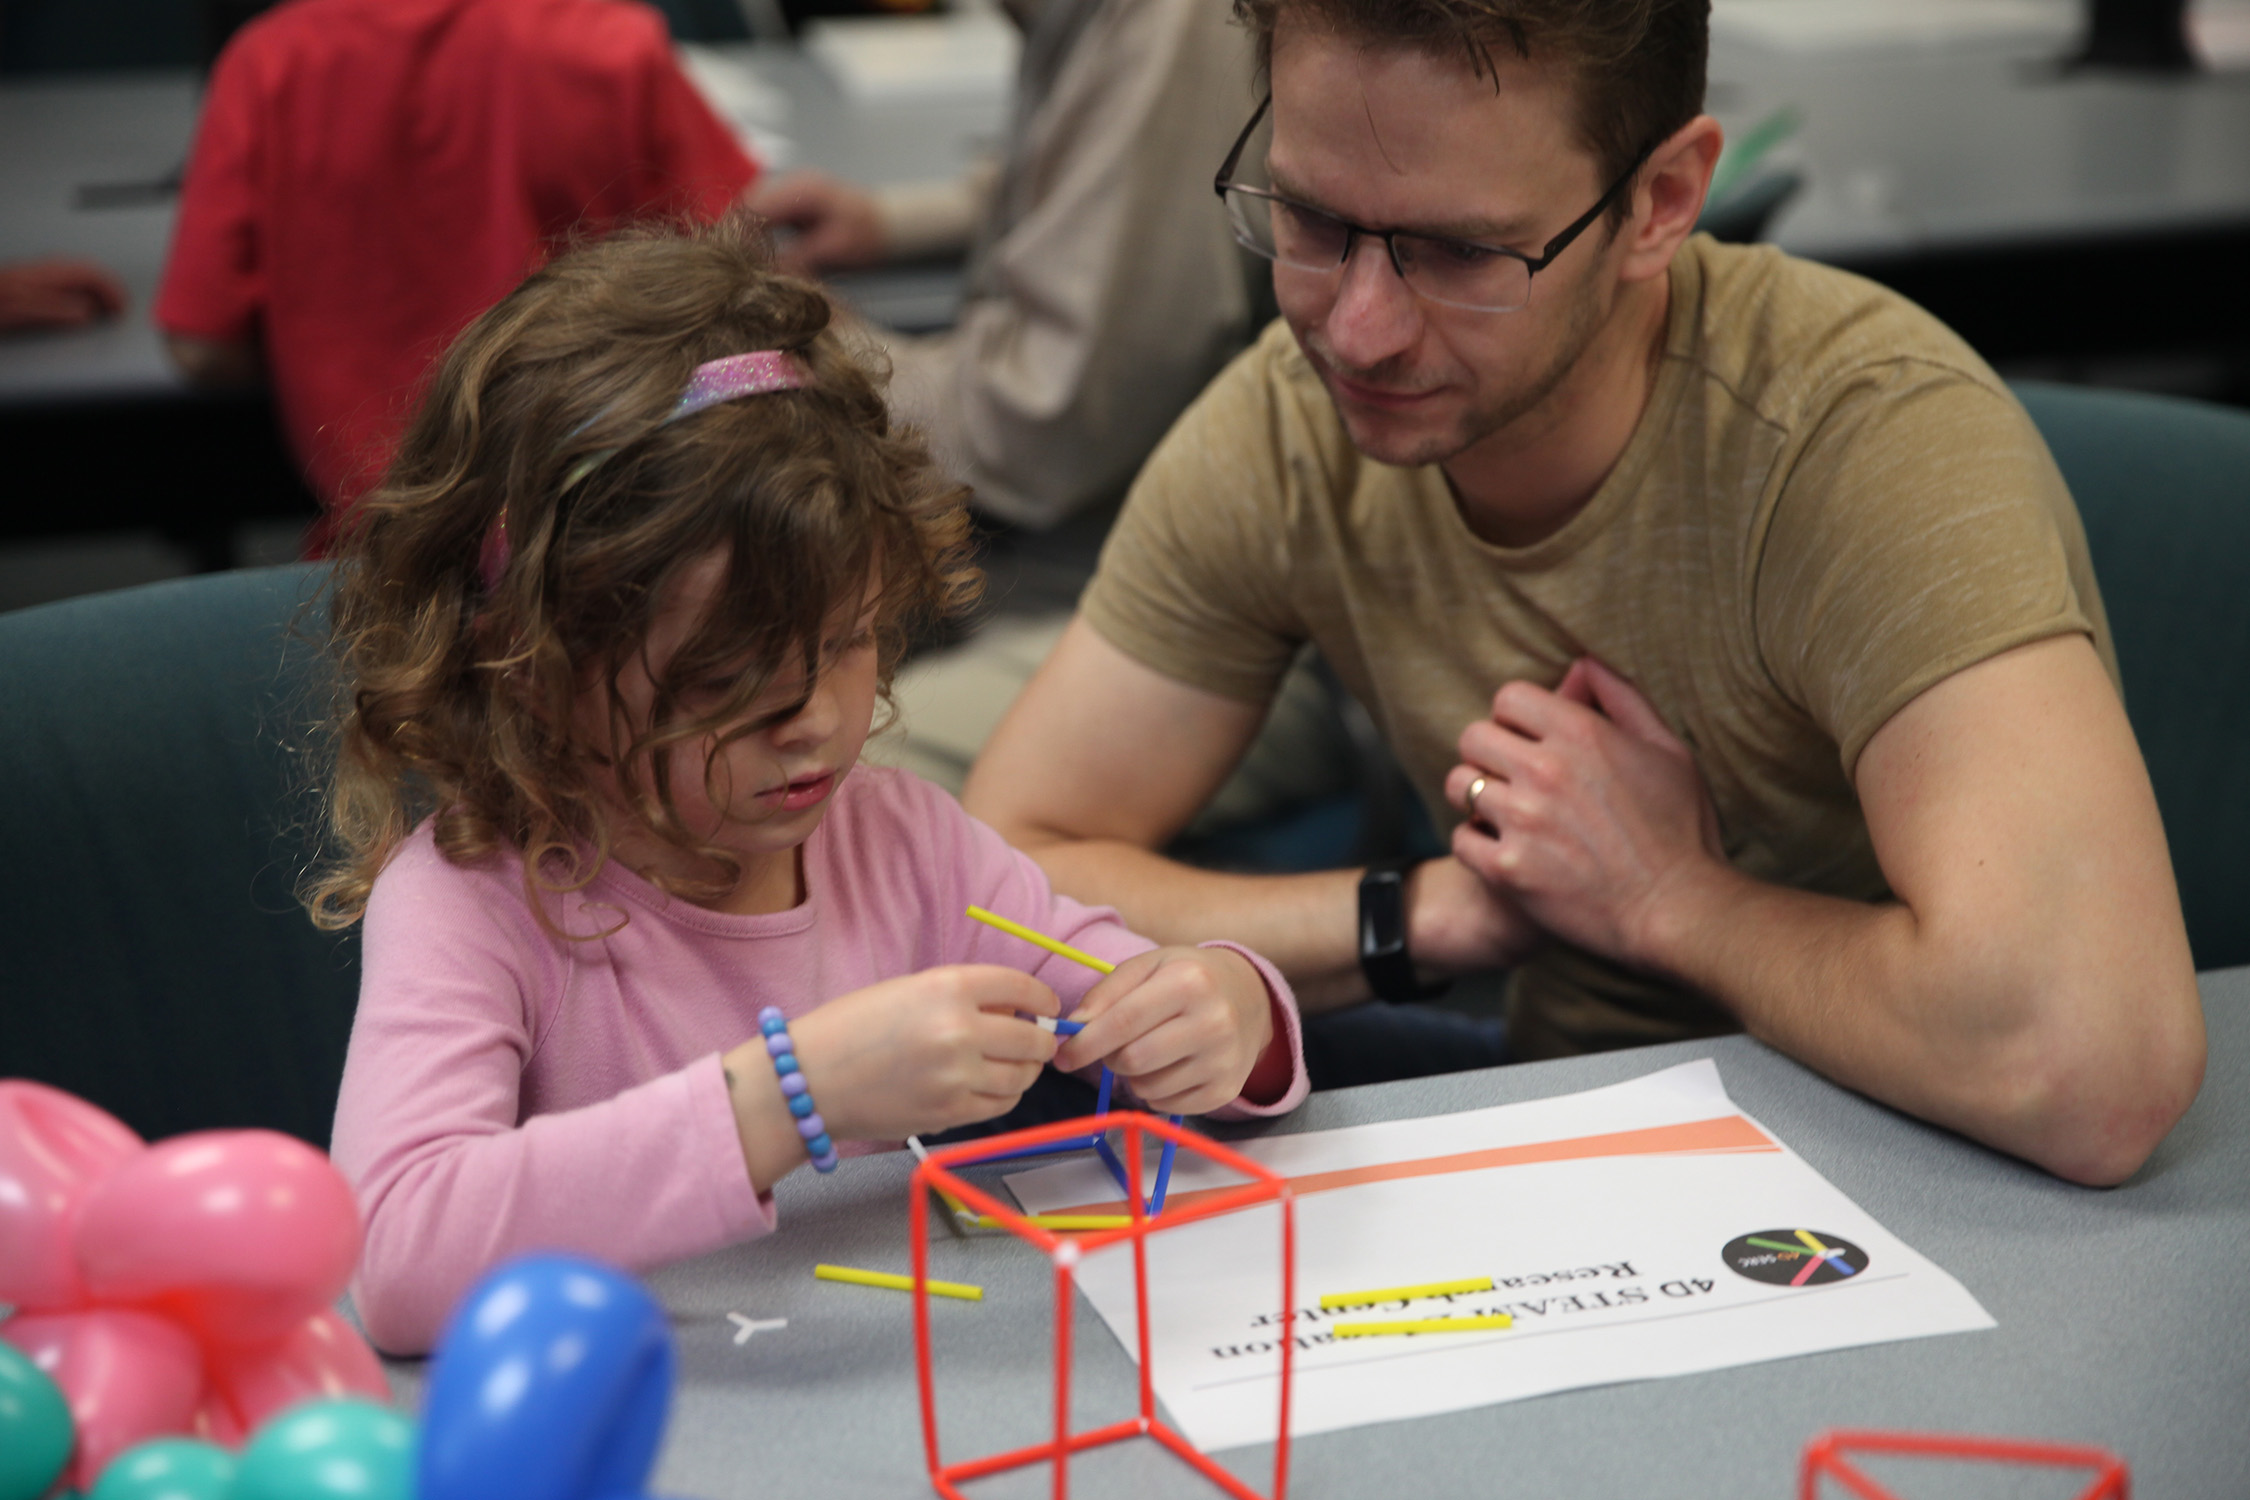 A father and his daughter participate in a craft event at the 2023 Texas A&M University Math and Stat Fair